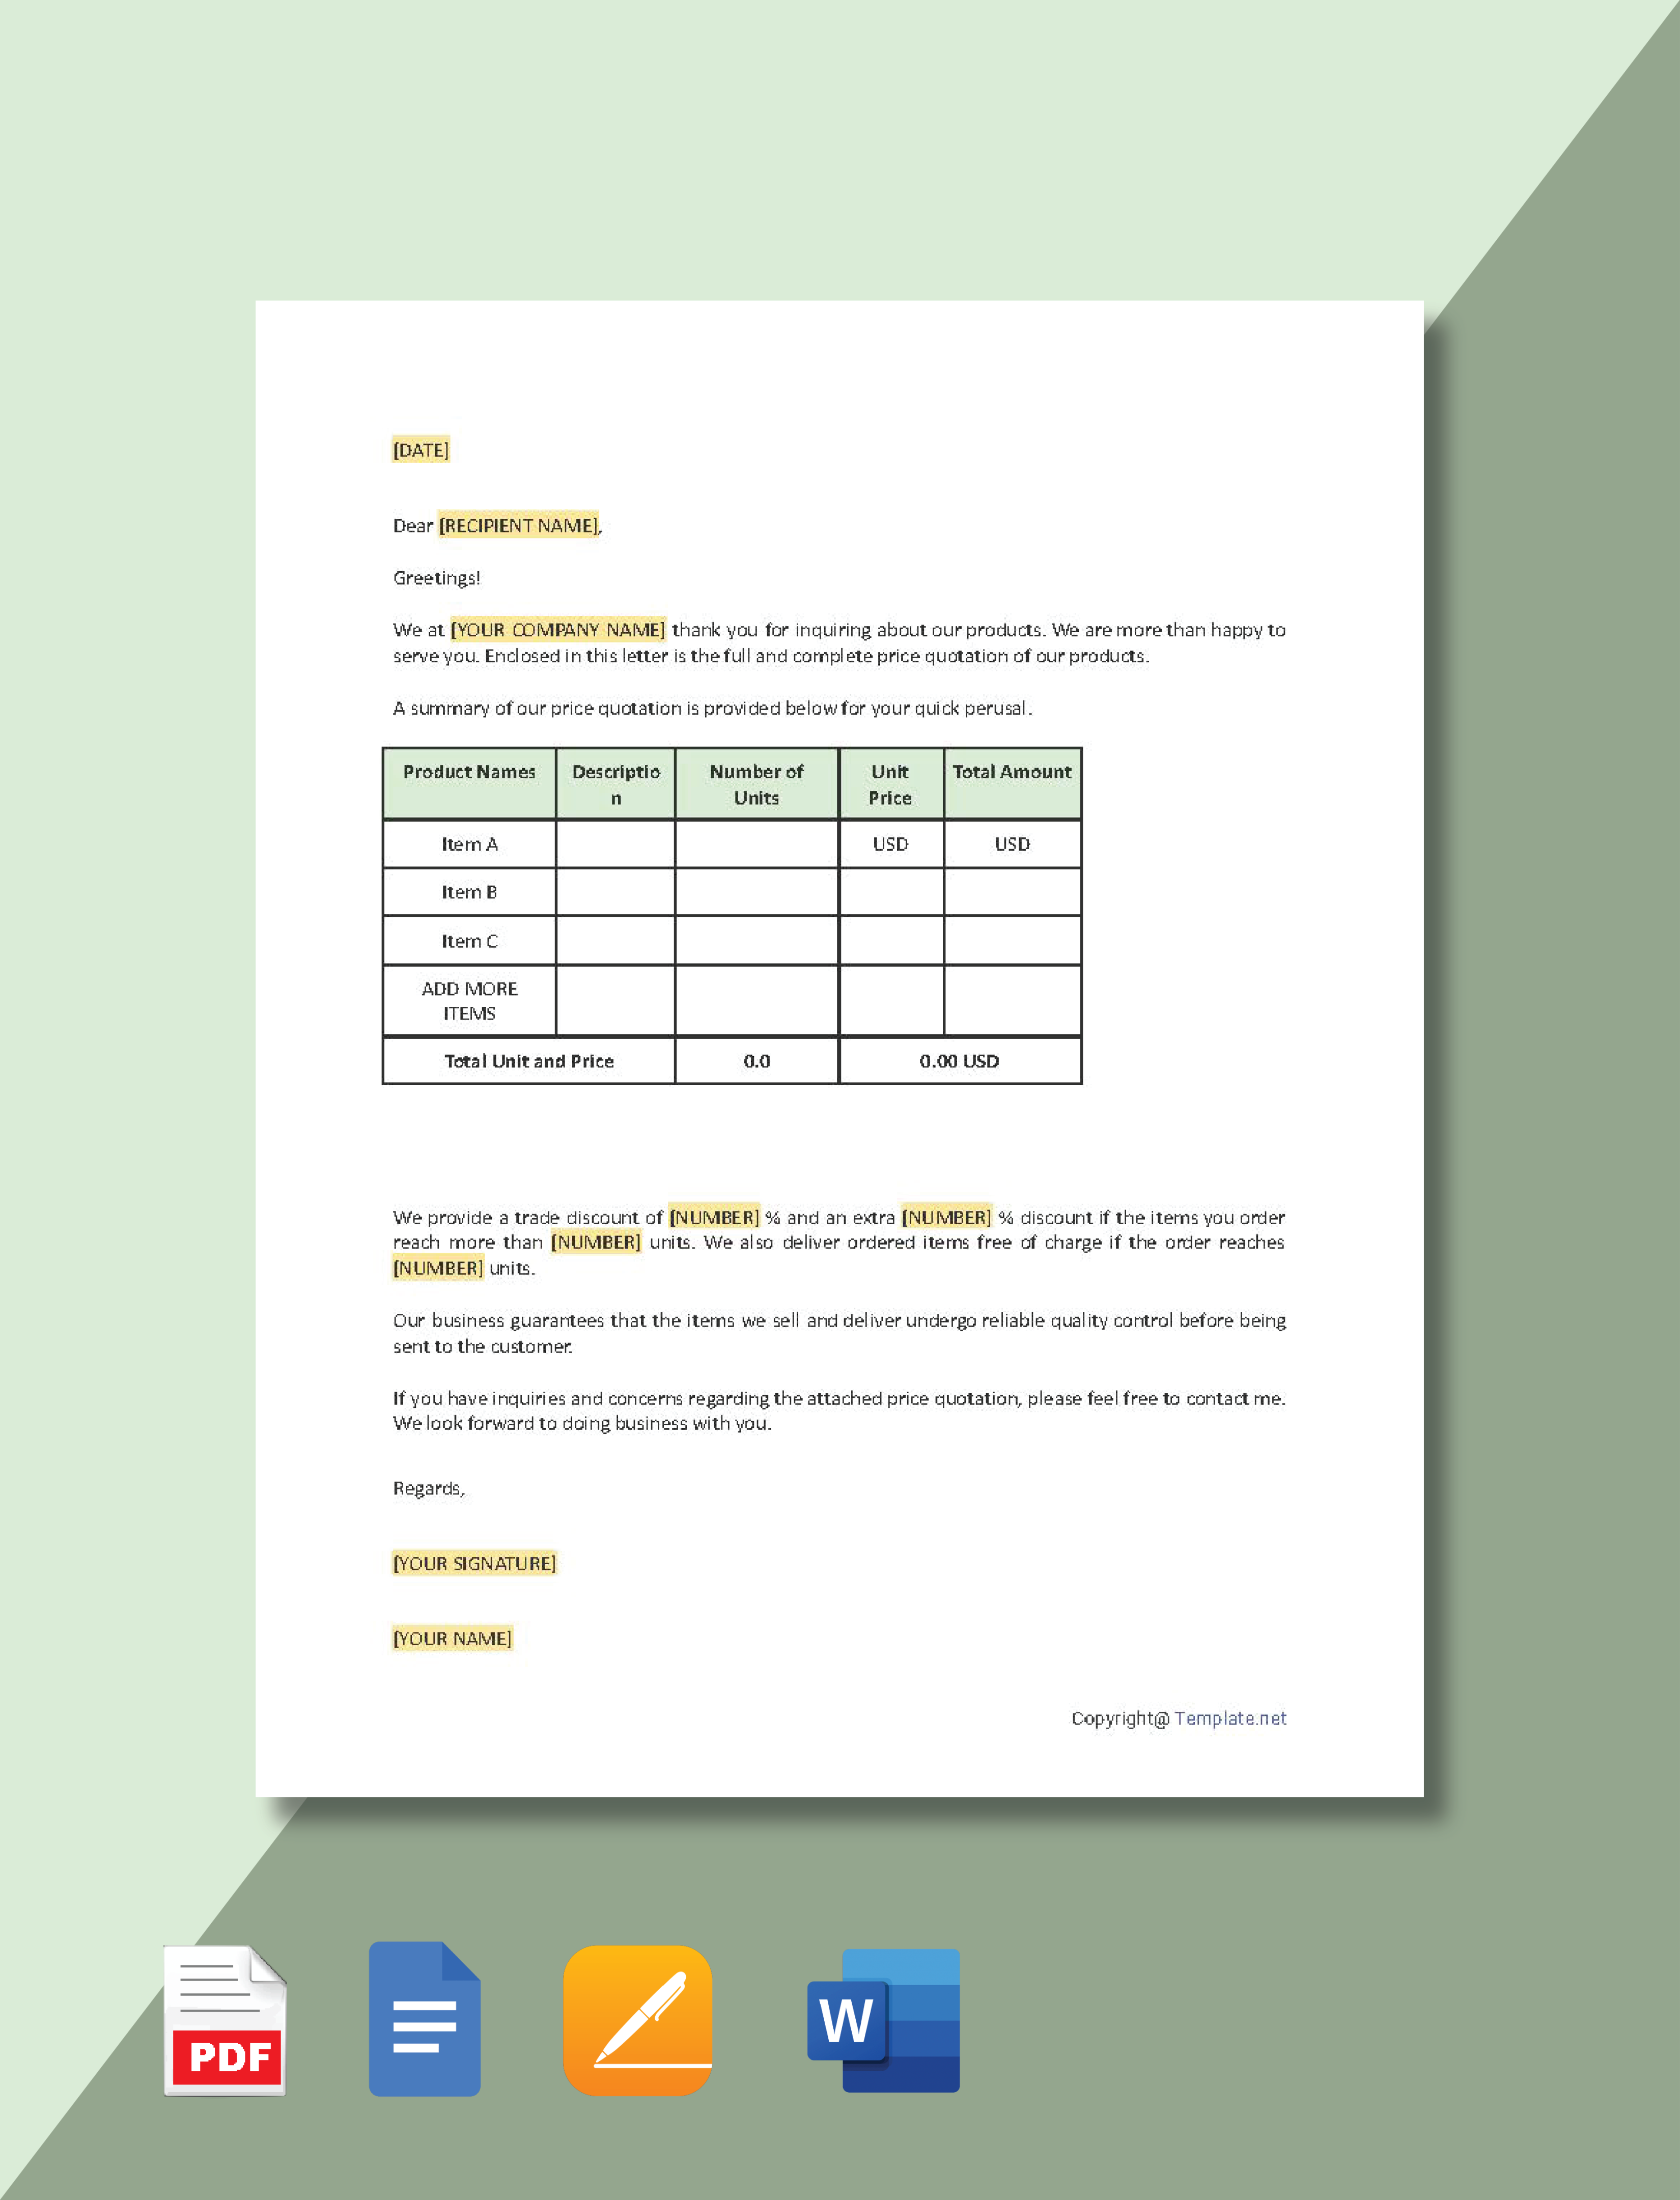 Free Price Quotation Letter Template - Download in Word, Google